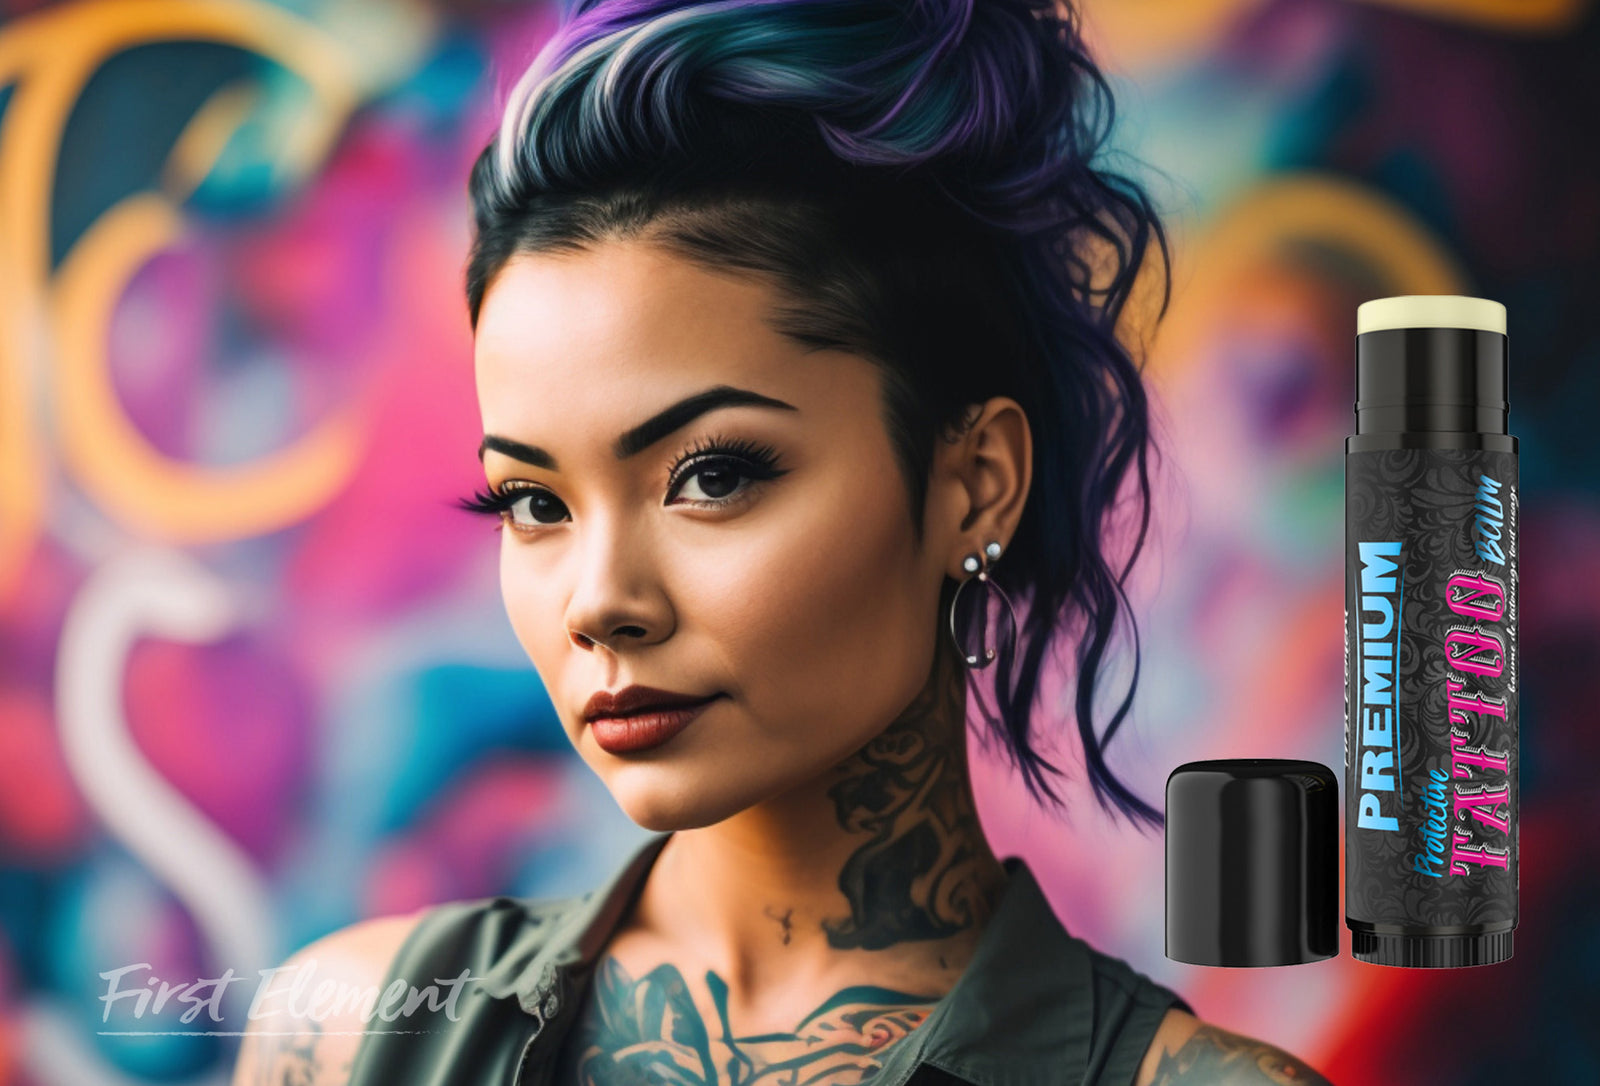 Attractive tattooed women with a First Element Tattoo Balm stick on the side of the image